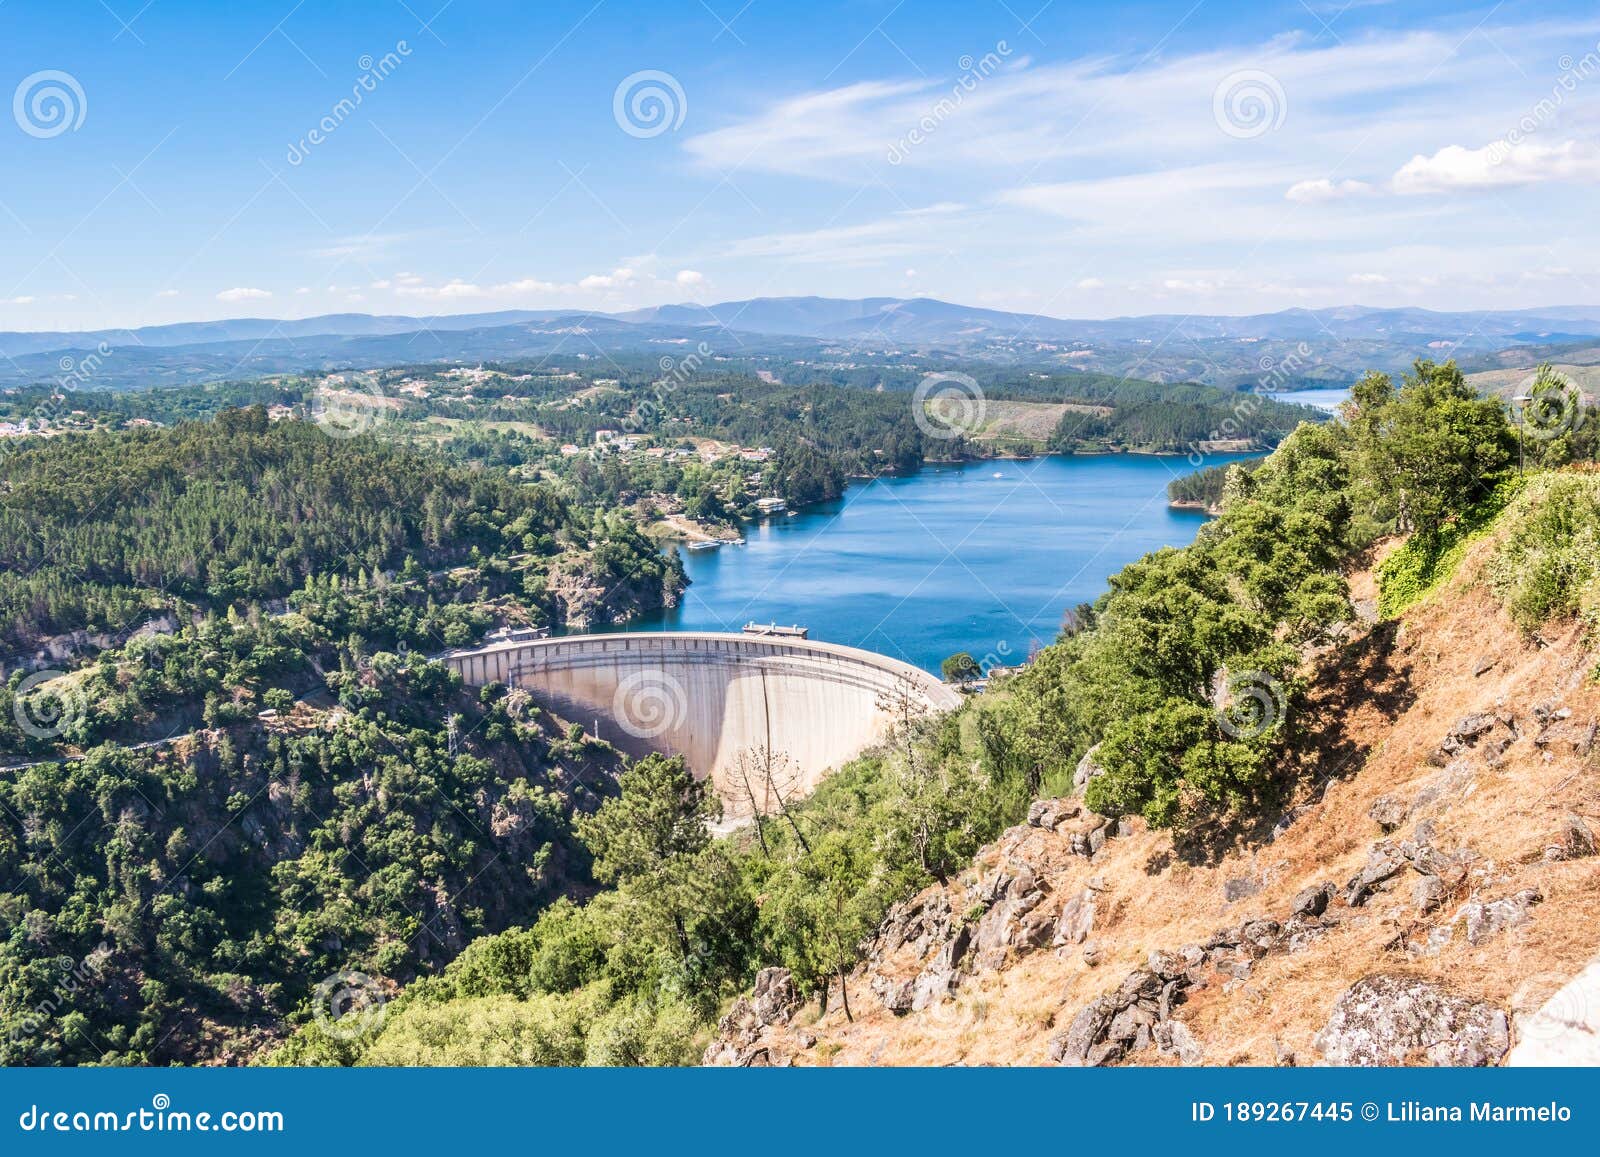 aerial and panoramic view over the cabril dam and the zÃÂªzere river with degraded mountains in the background, pedrogÃÂ£o pequeno -